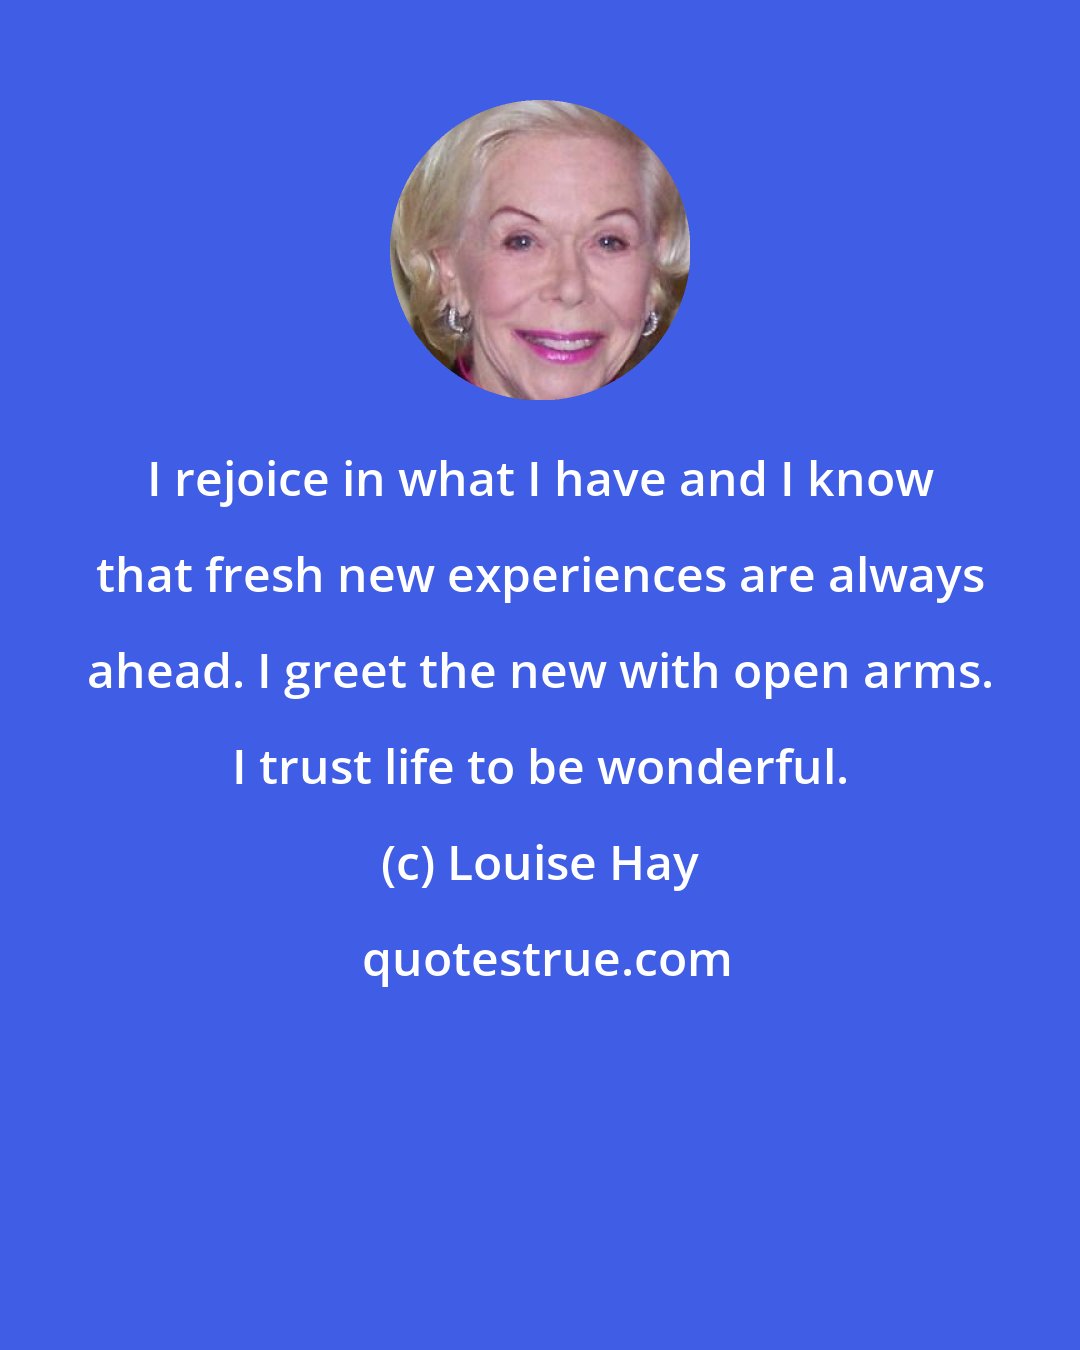 Louise Hay: I rejoice in what I have and I know that fresh new experiences are always ahead. I greet the new with open arms. I trust life to be wonderful.